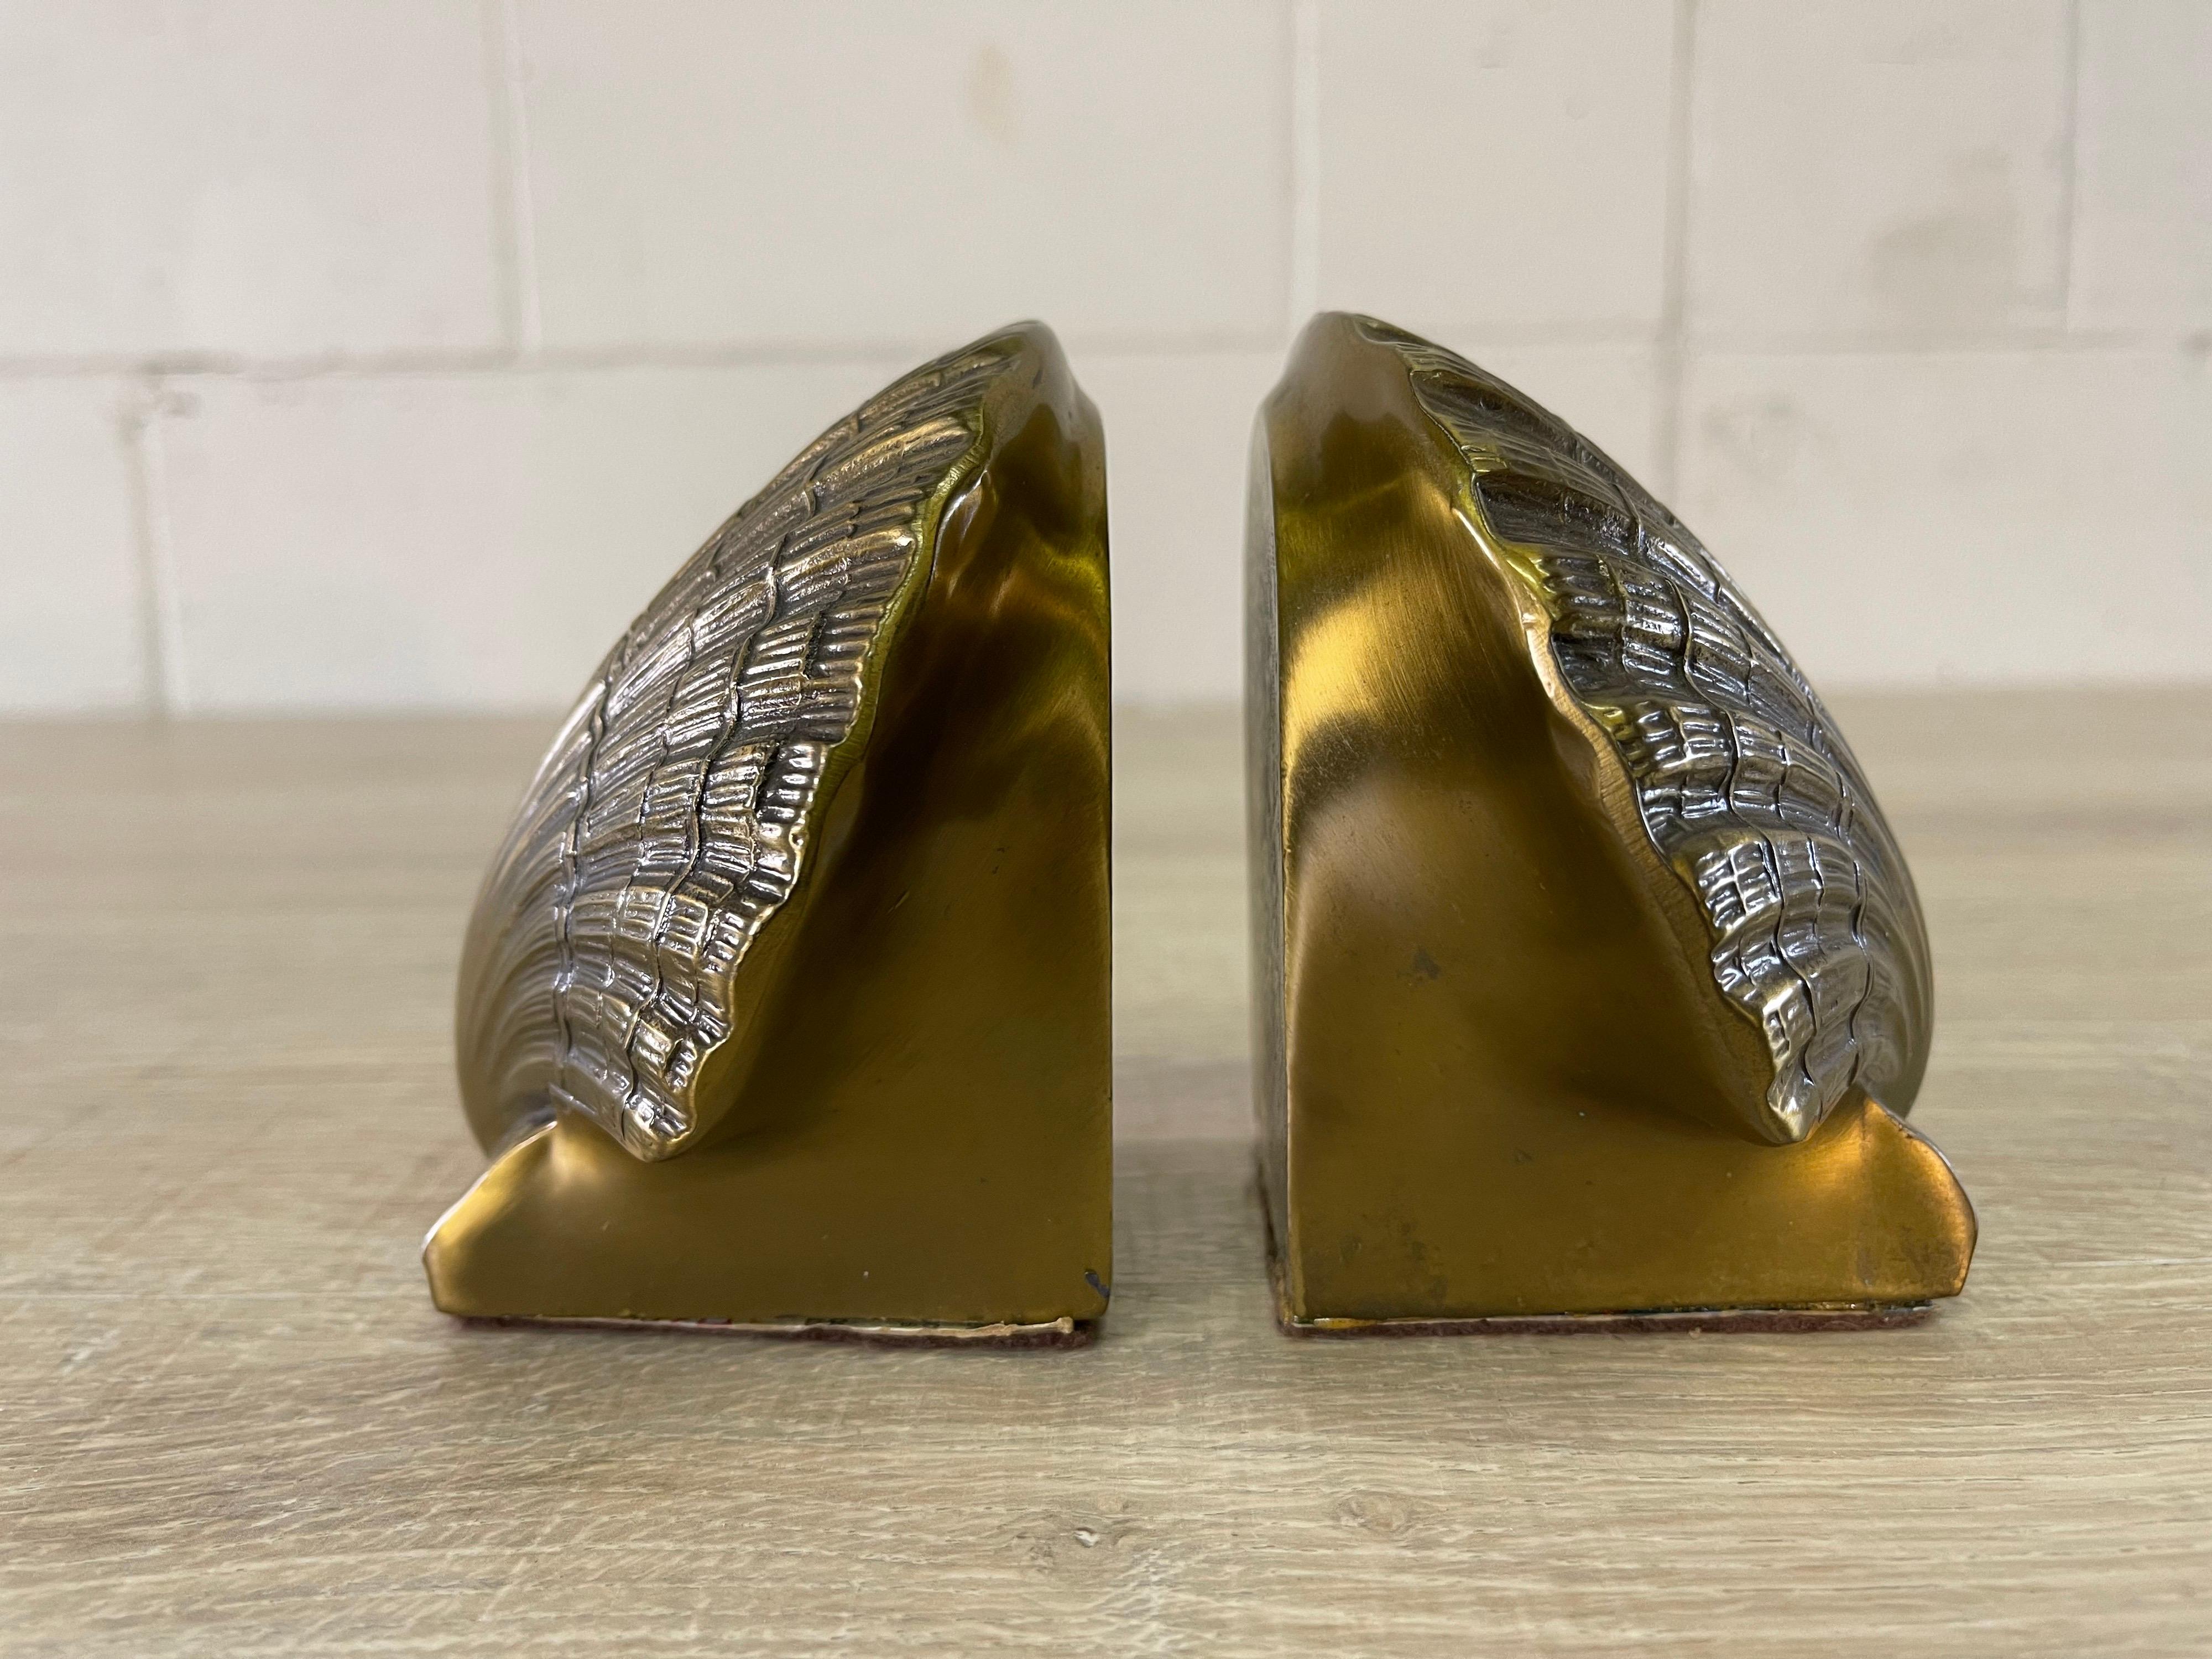 Vintage 1970s pair of brass clam shell bookends. The bookends are heavy and can hold thick books. Marked.